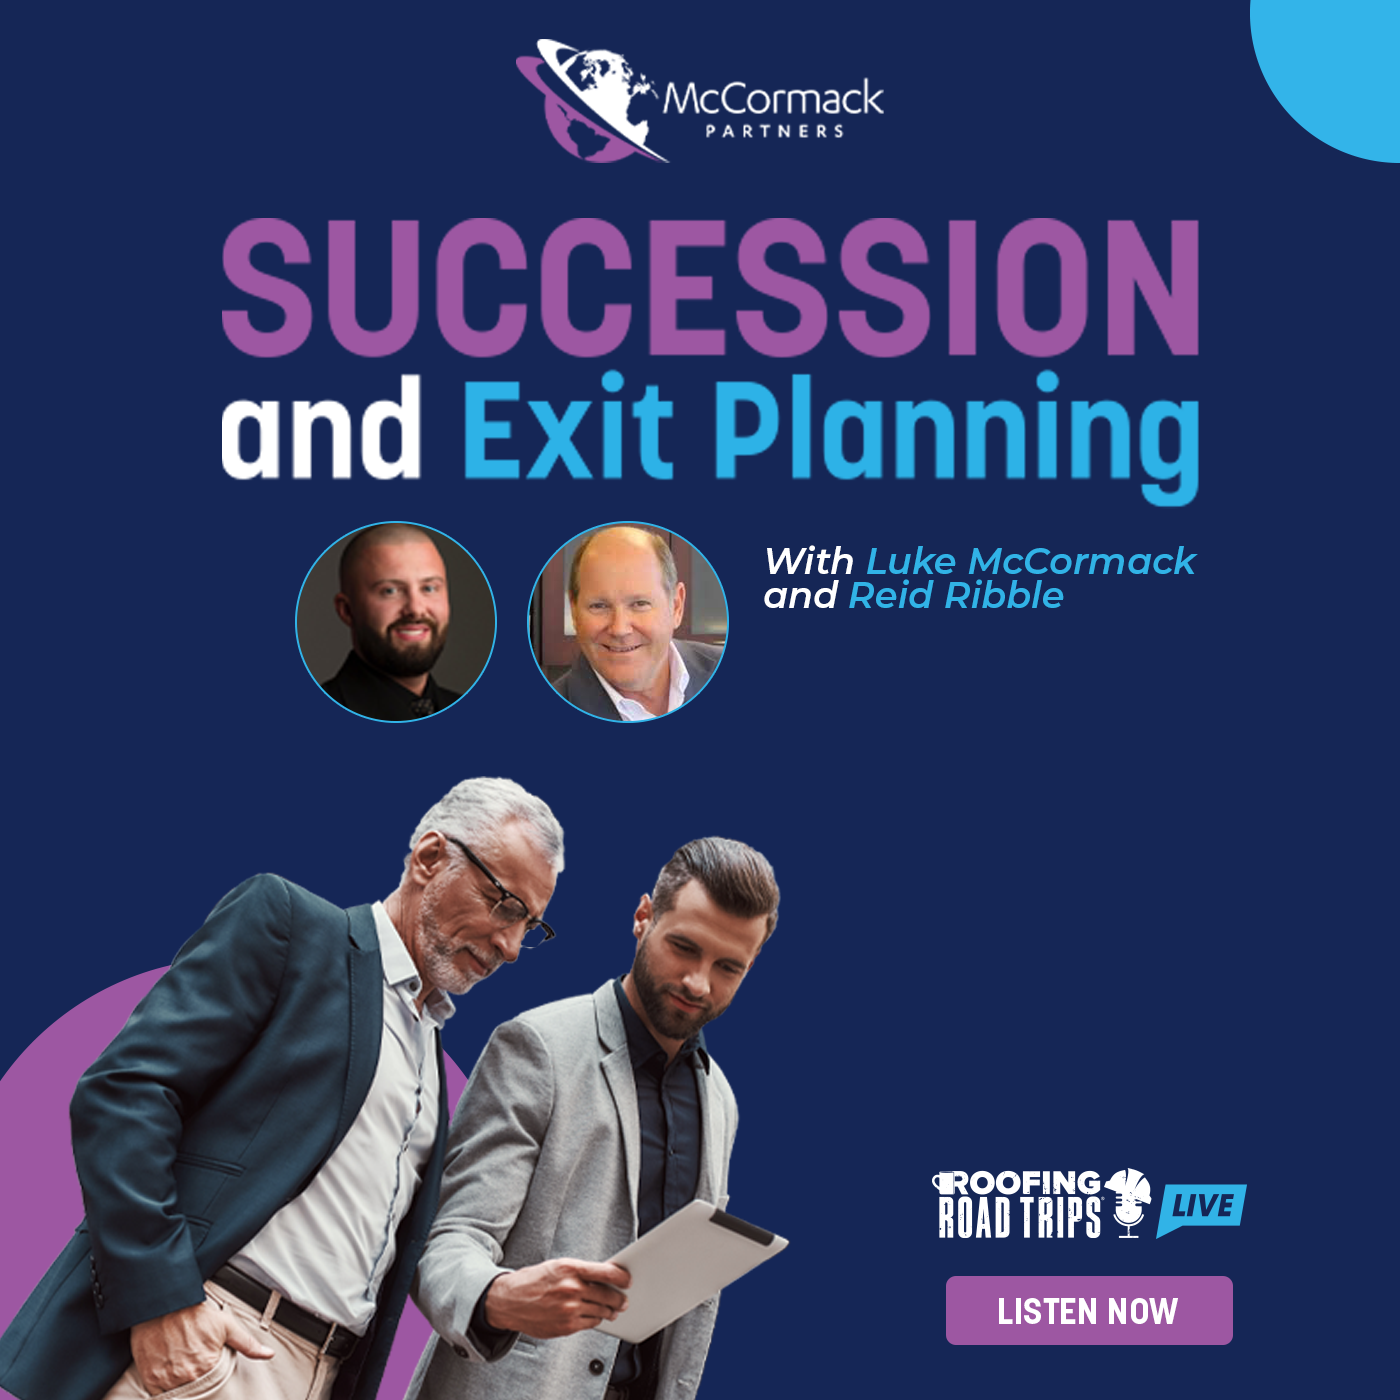 McCormack - Podcast - Succession and Exit Planning - Watch Now